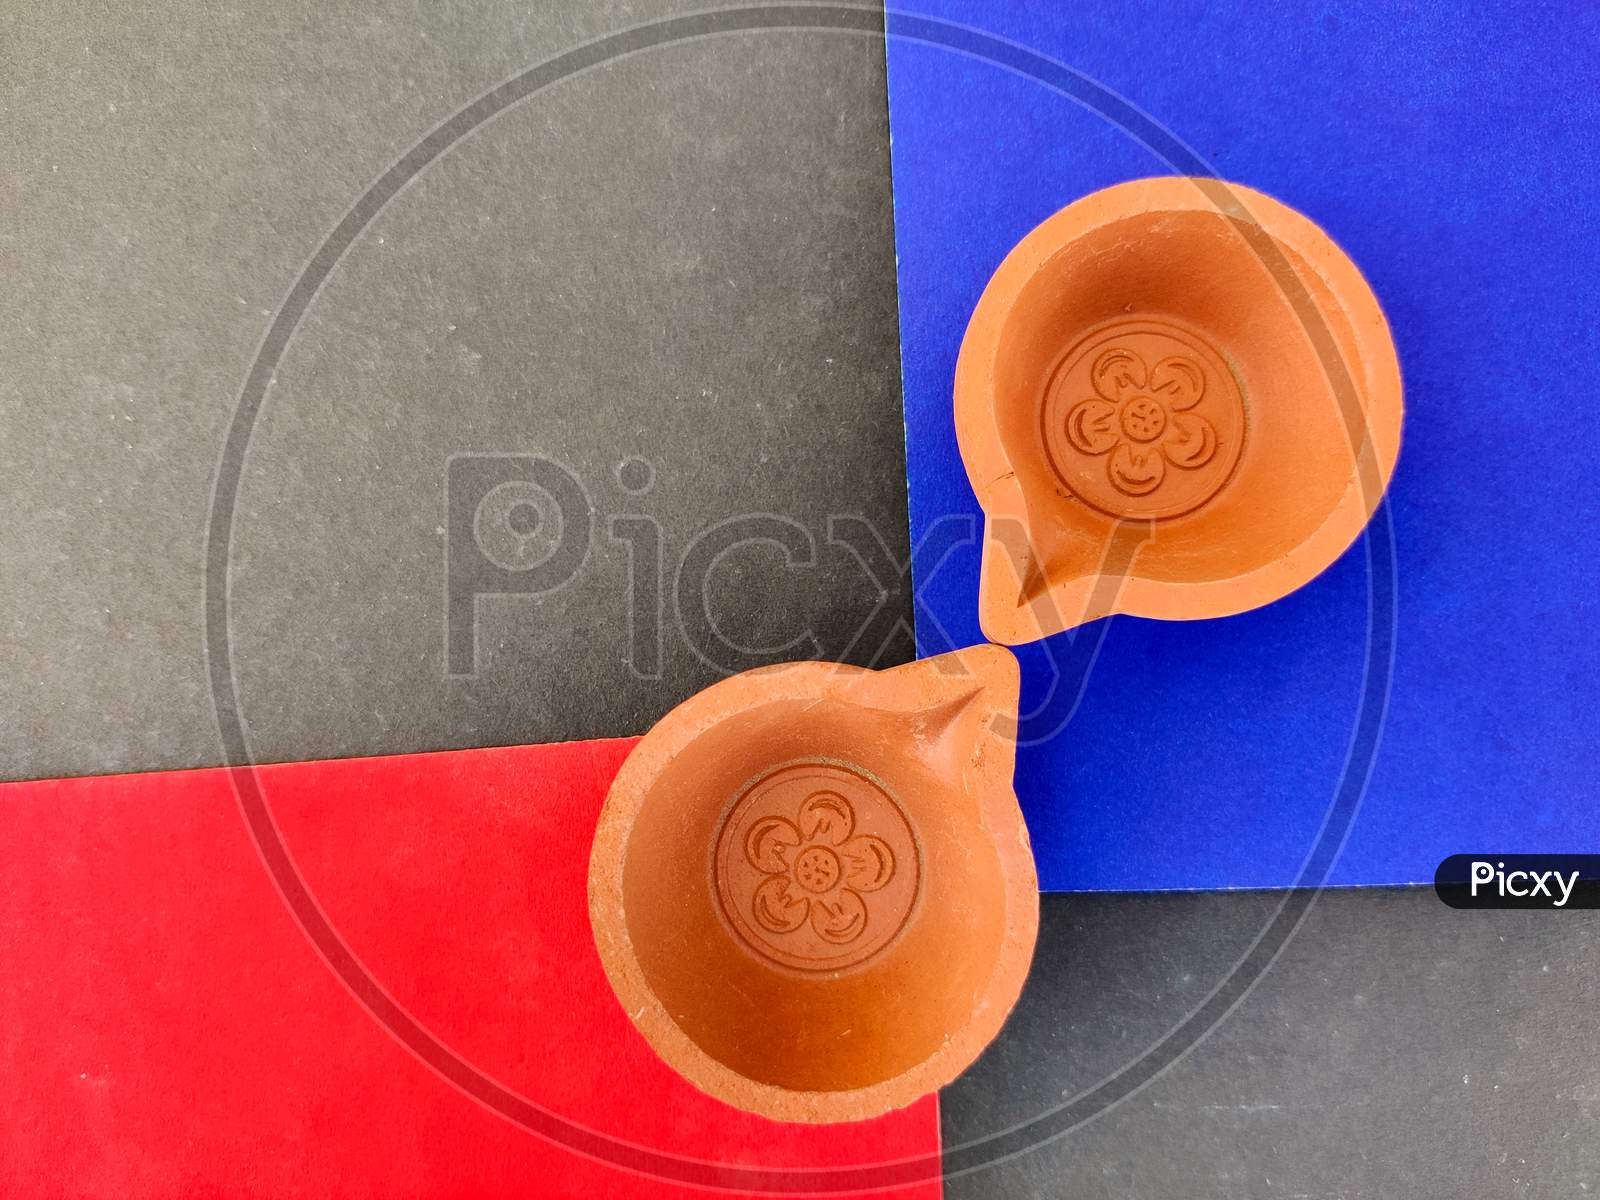 Top View Of Two Clay Lamps Or Diya Or Oil Lamps Isolated On Red And Blue Background